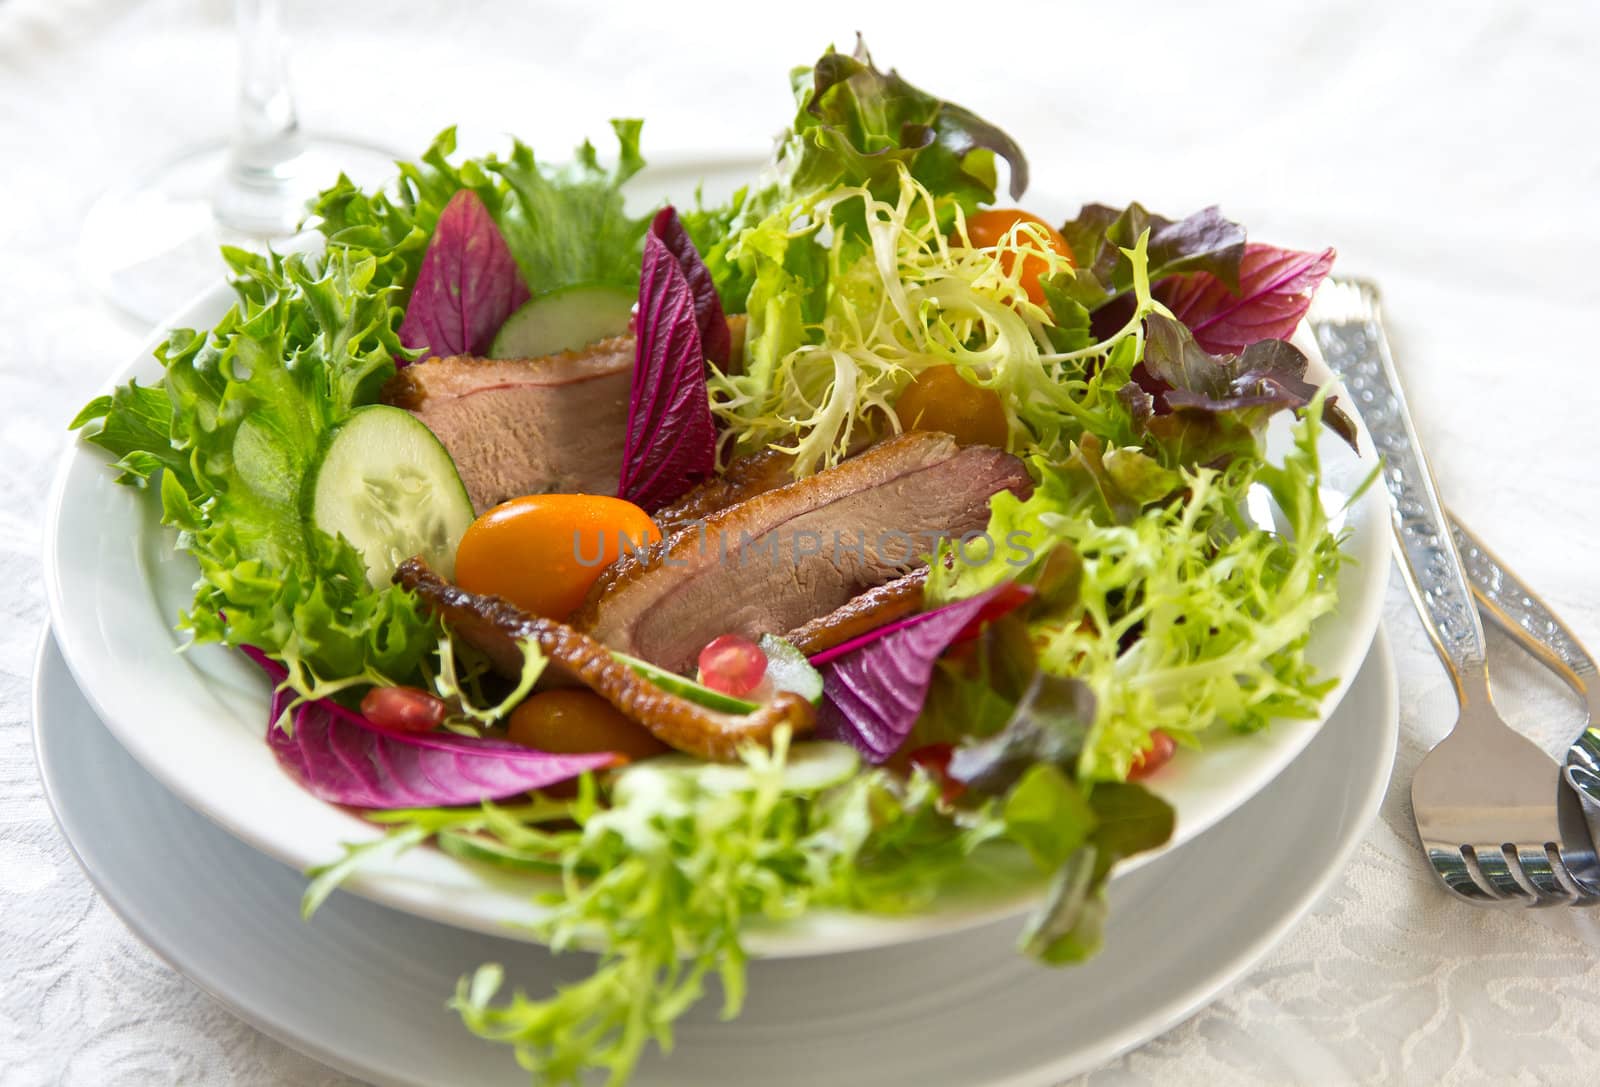 Smoked duck with lettuce,cherry tomato and pomegranate salad